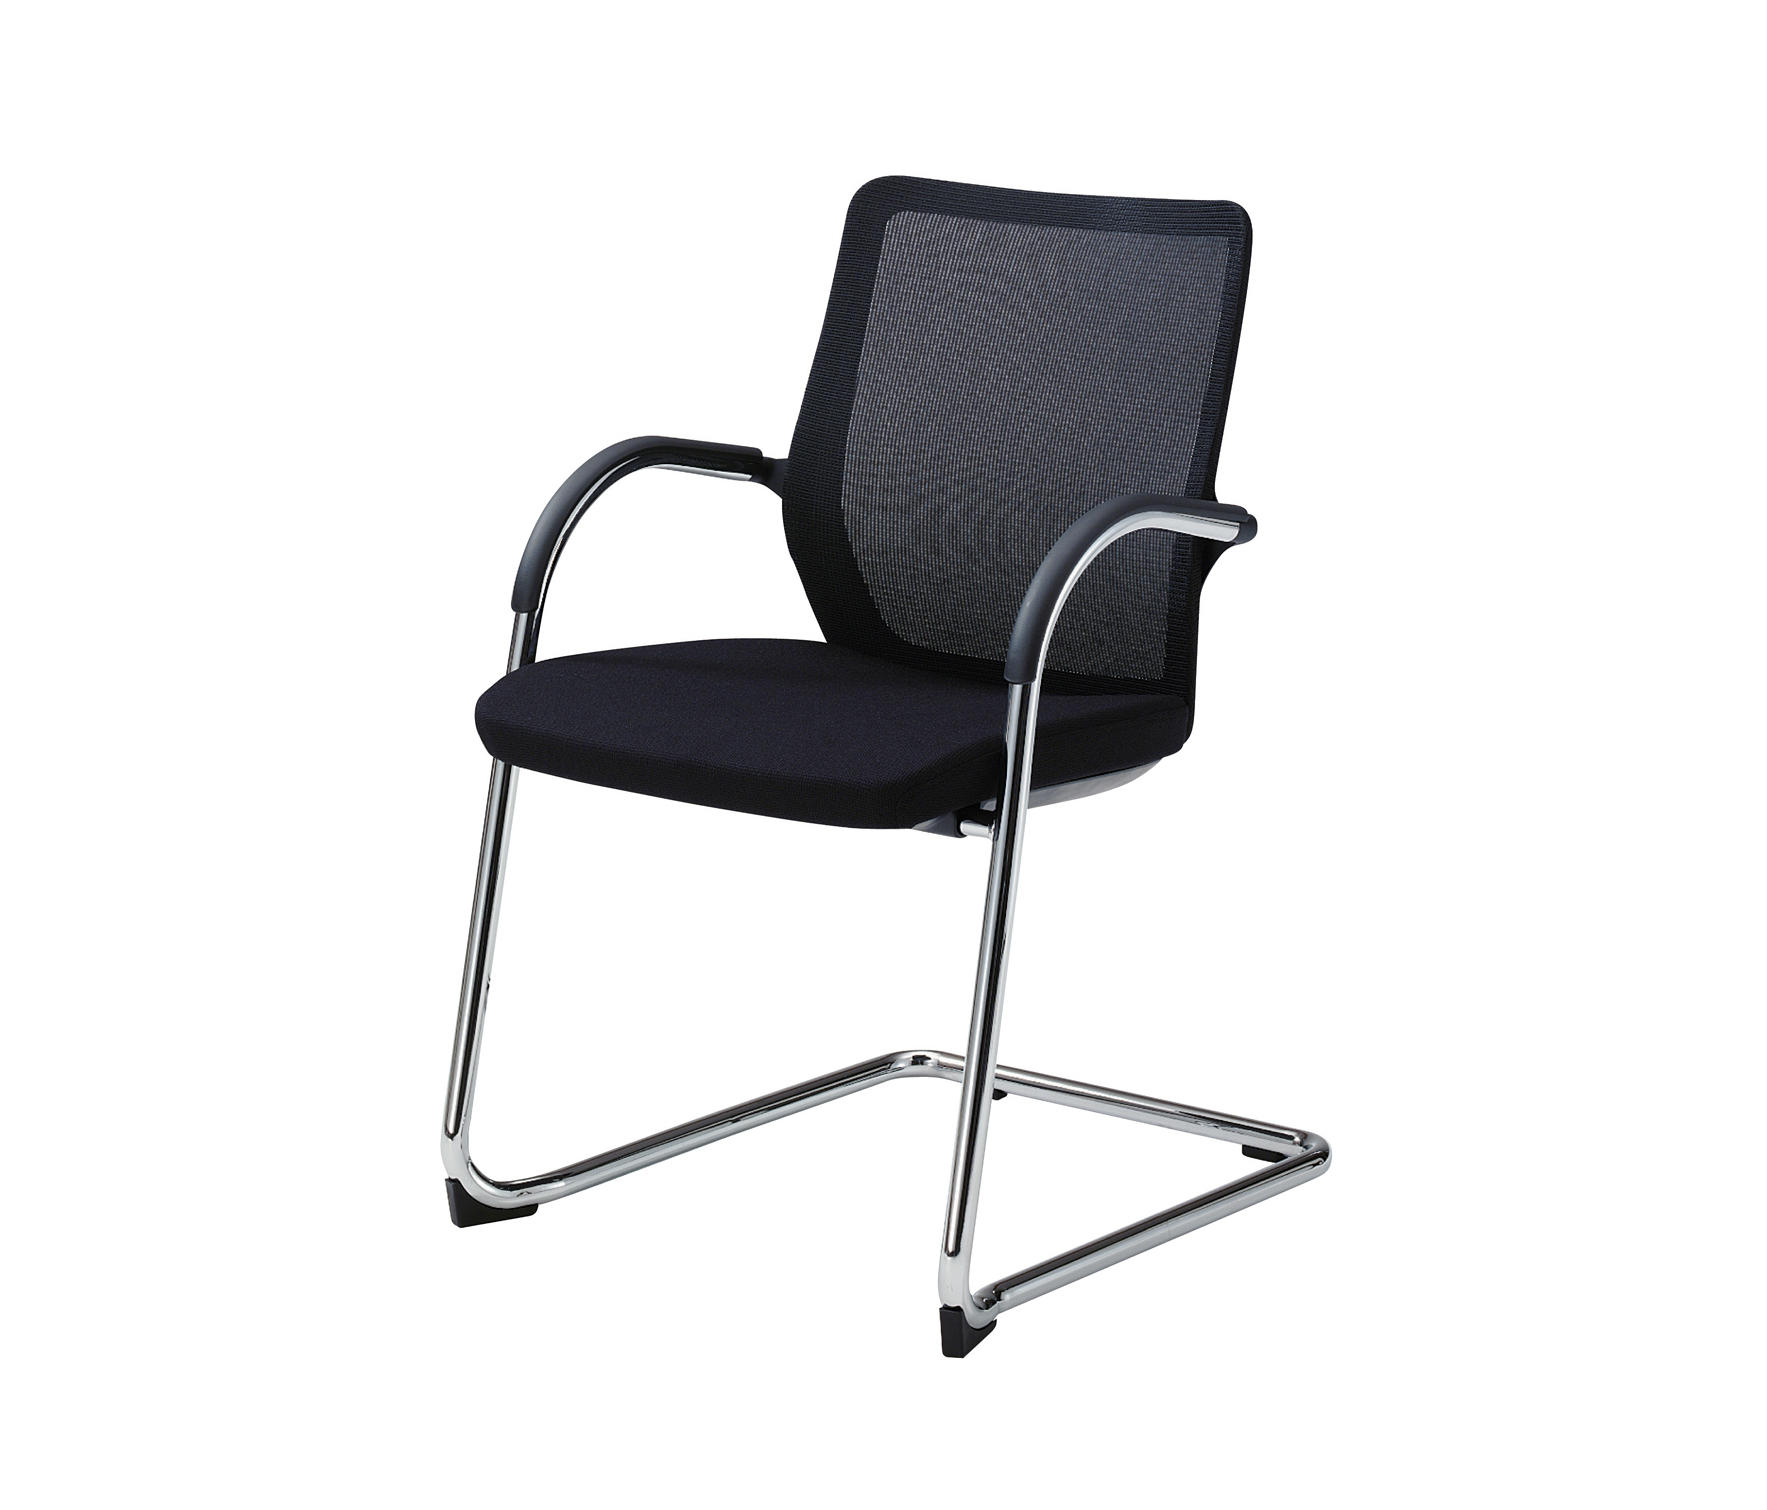 T1 Meeting Chair Designer Furniture Architonic